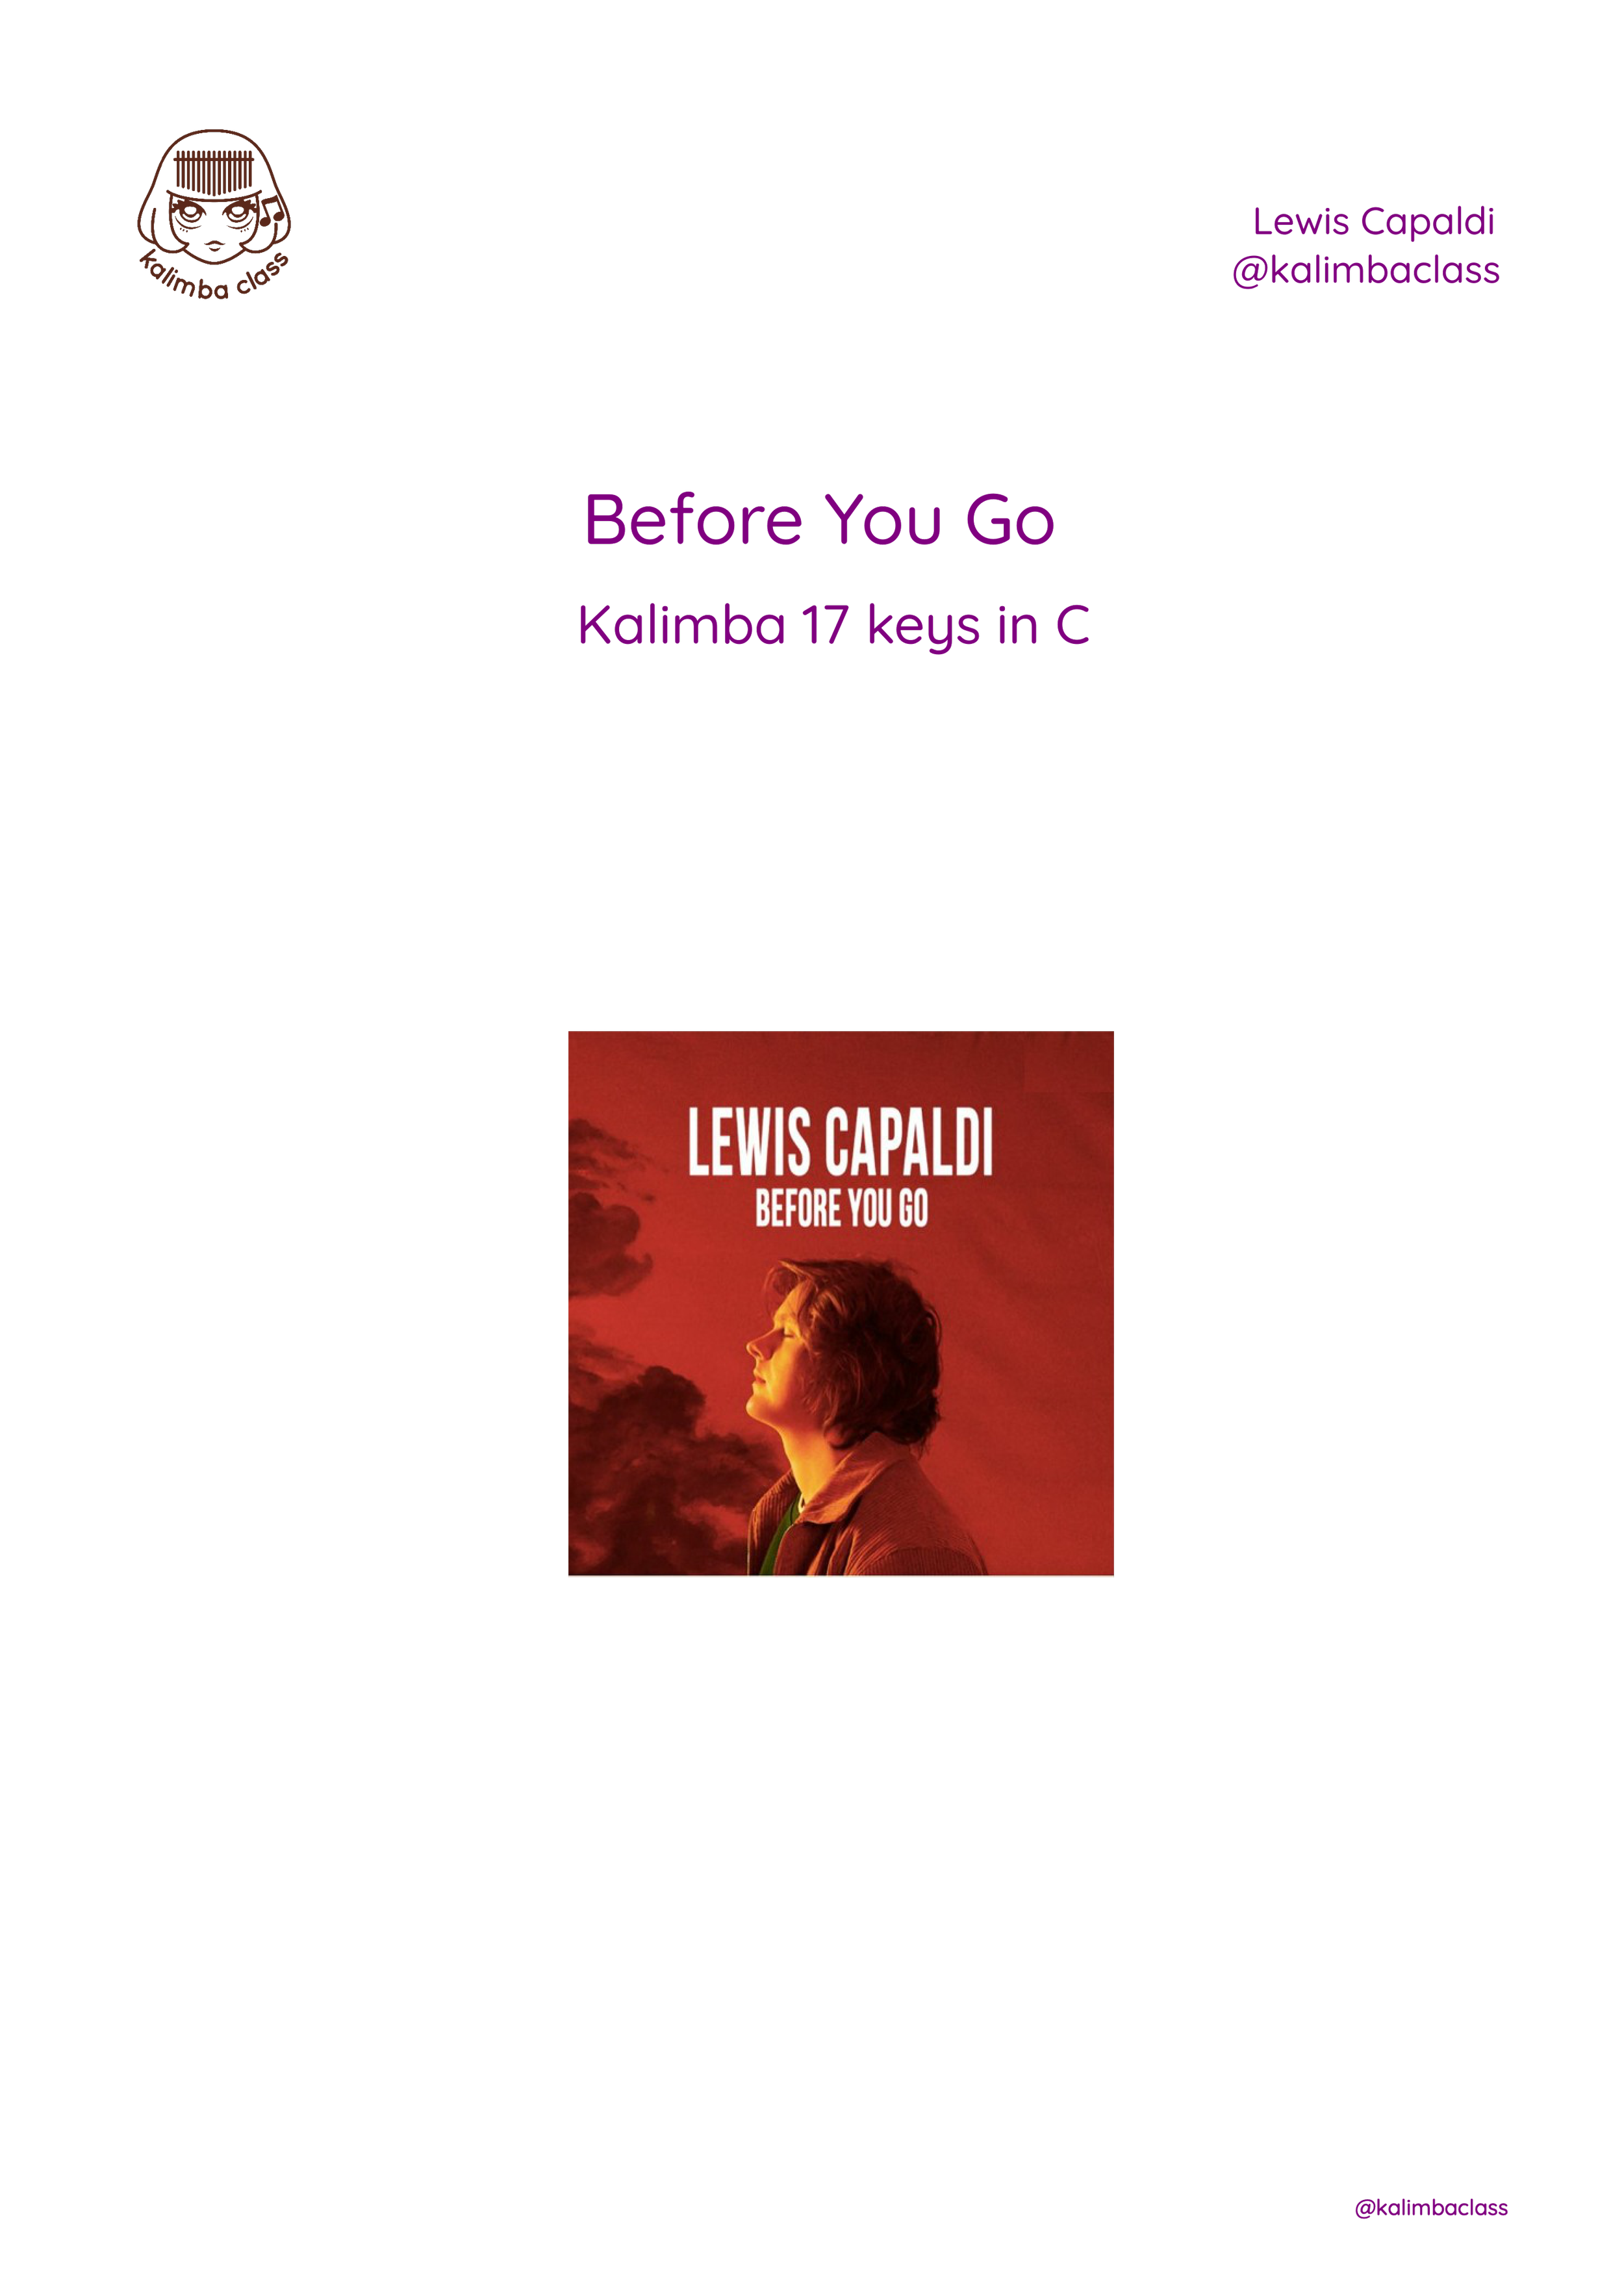 Before You Go by Lewis Capaldi